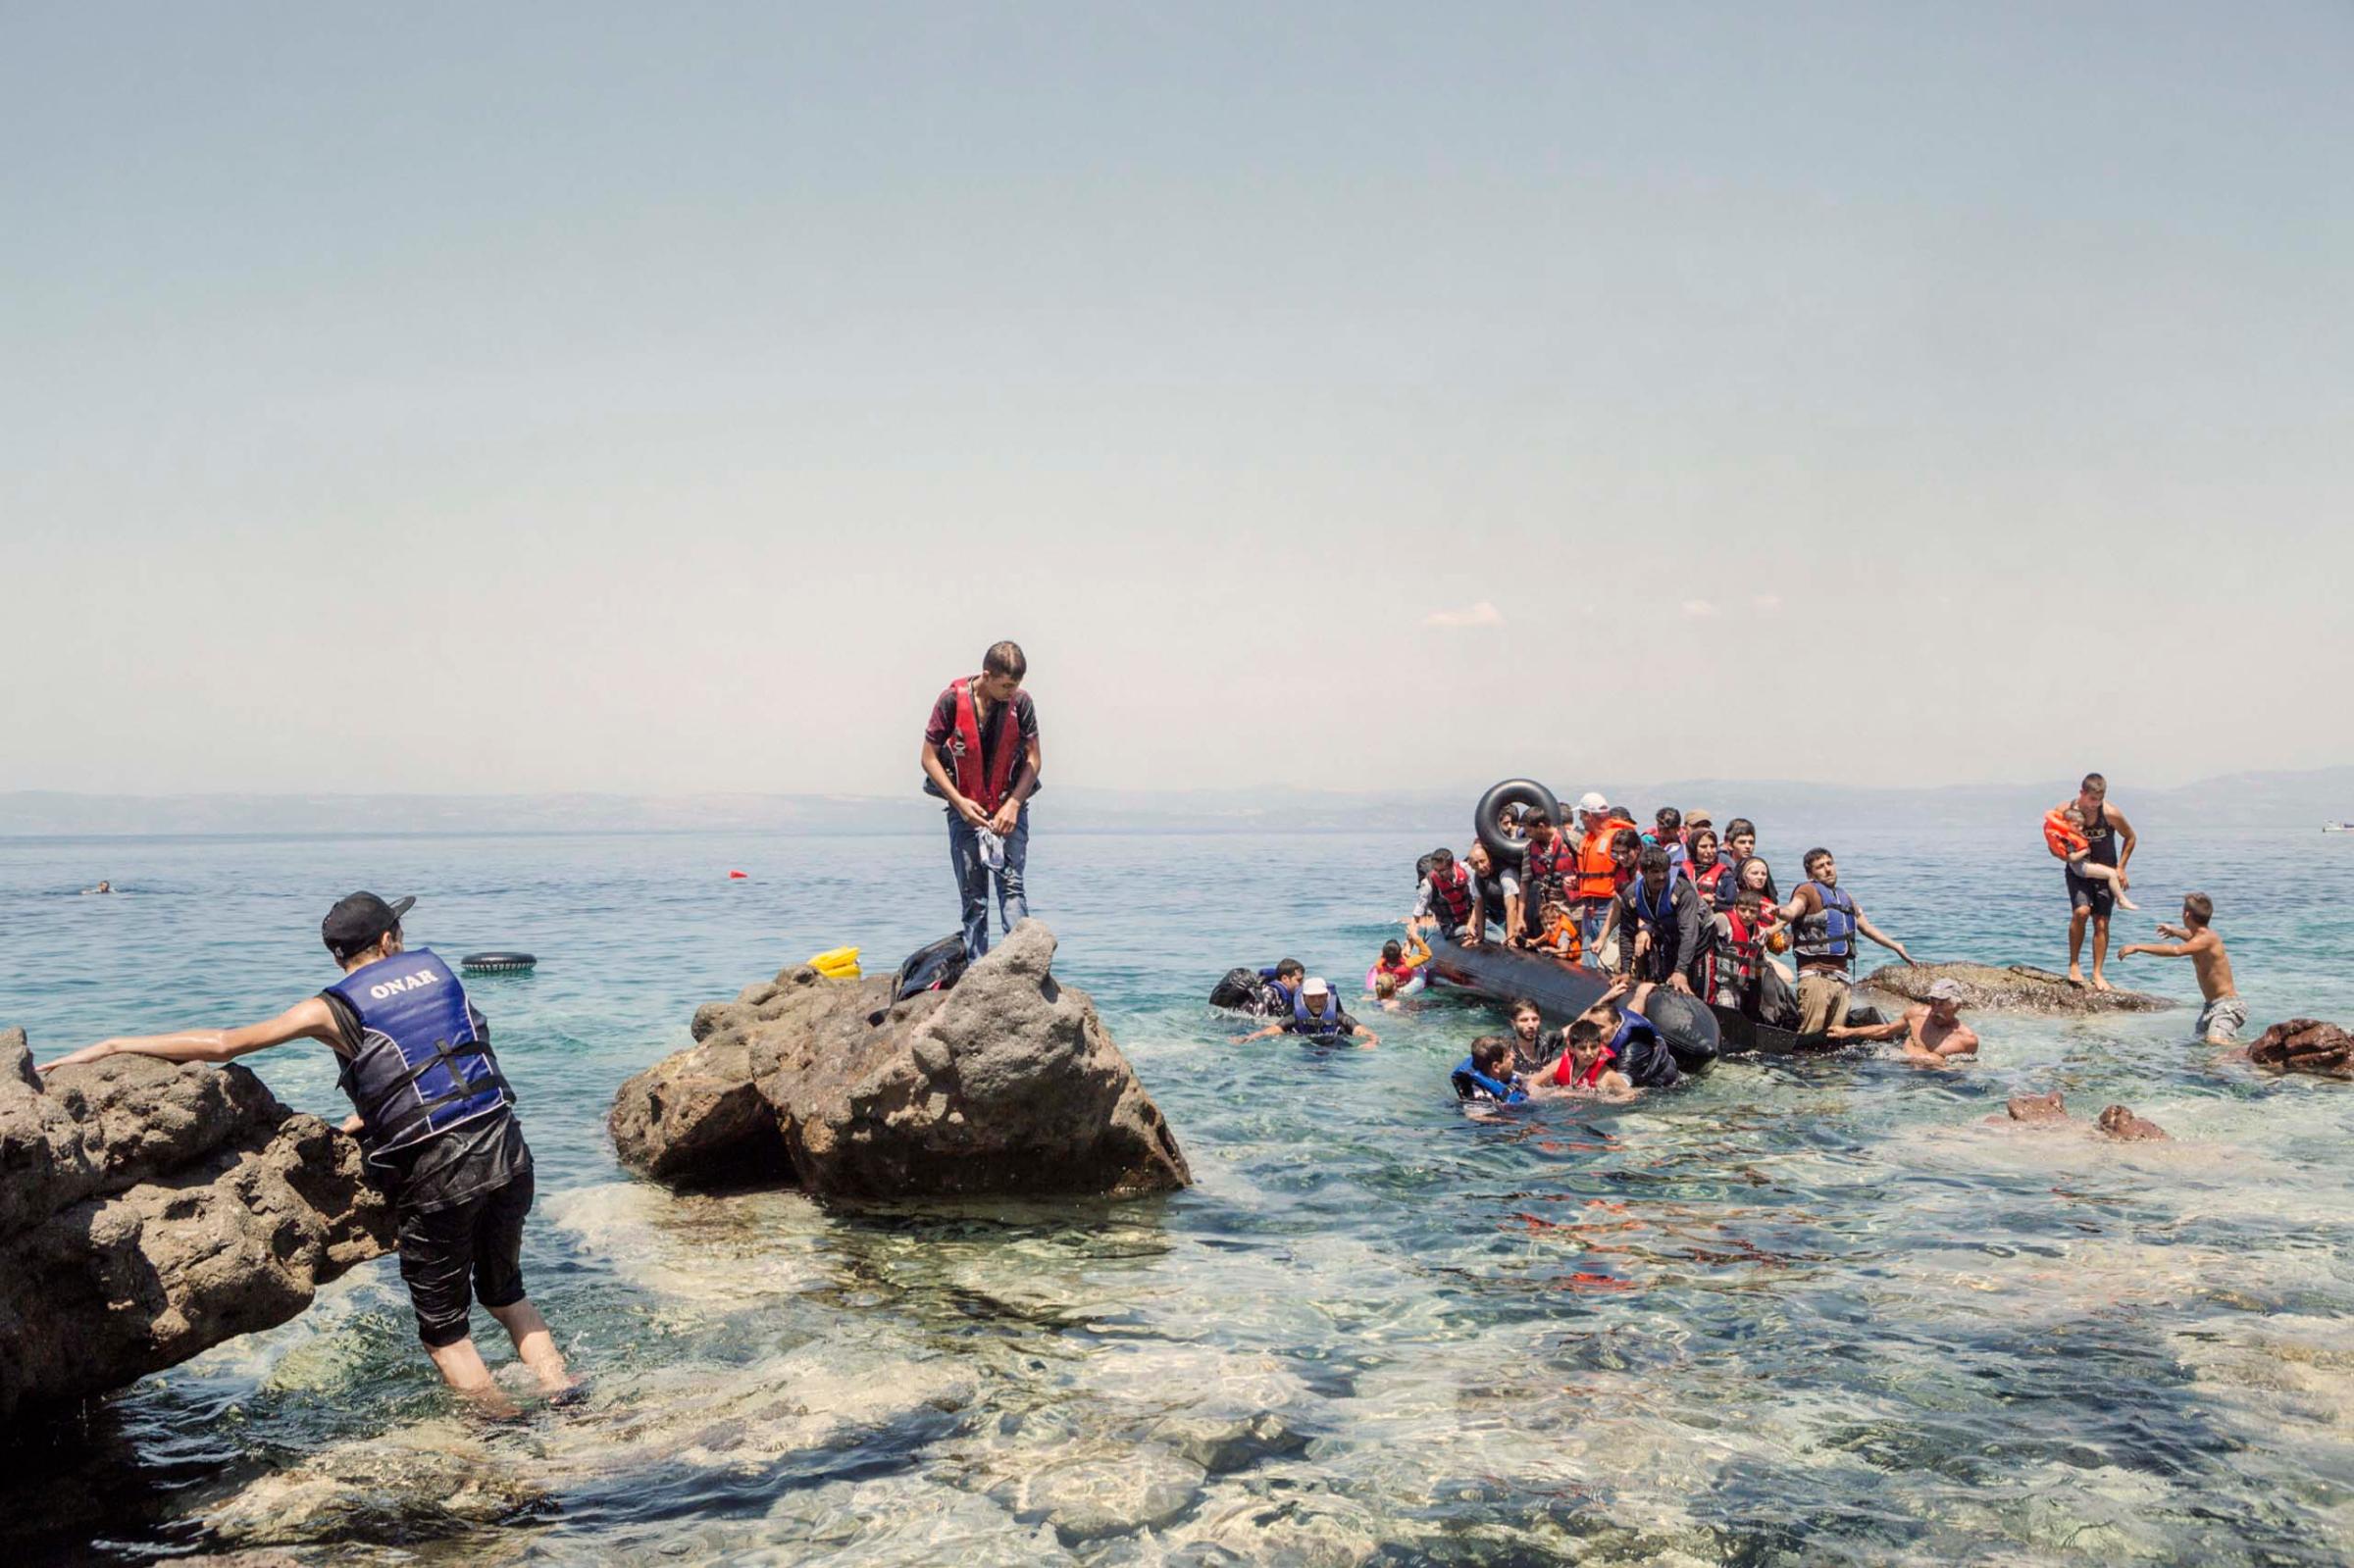 A boat carrying Syrians and people of other nationalities is dragged ashore by two local farmers. The boat had started to leak, forcing a small group of people to swim to the beach in Lesbos, Greece, Aug. 5, 2015.